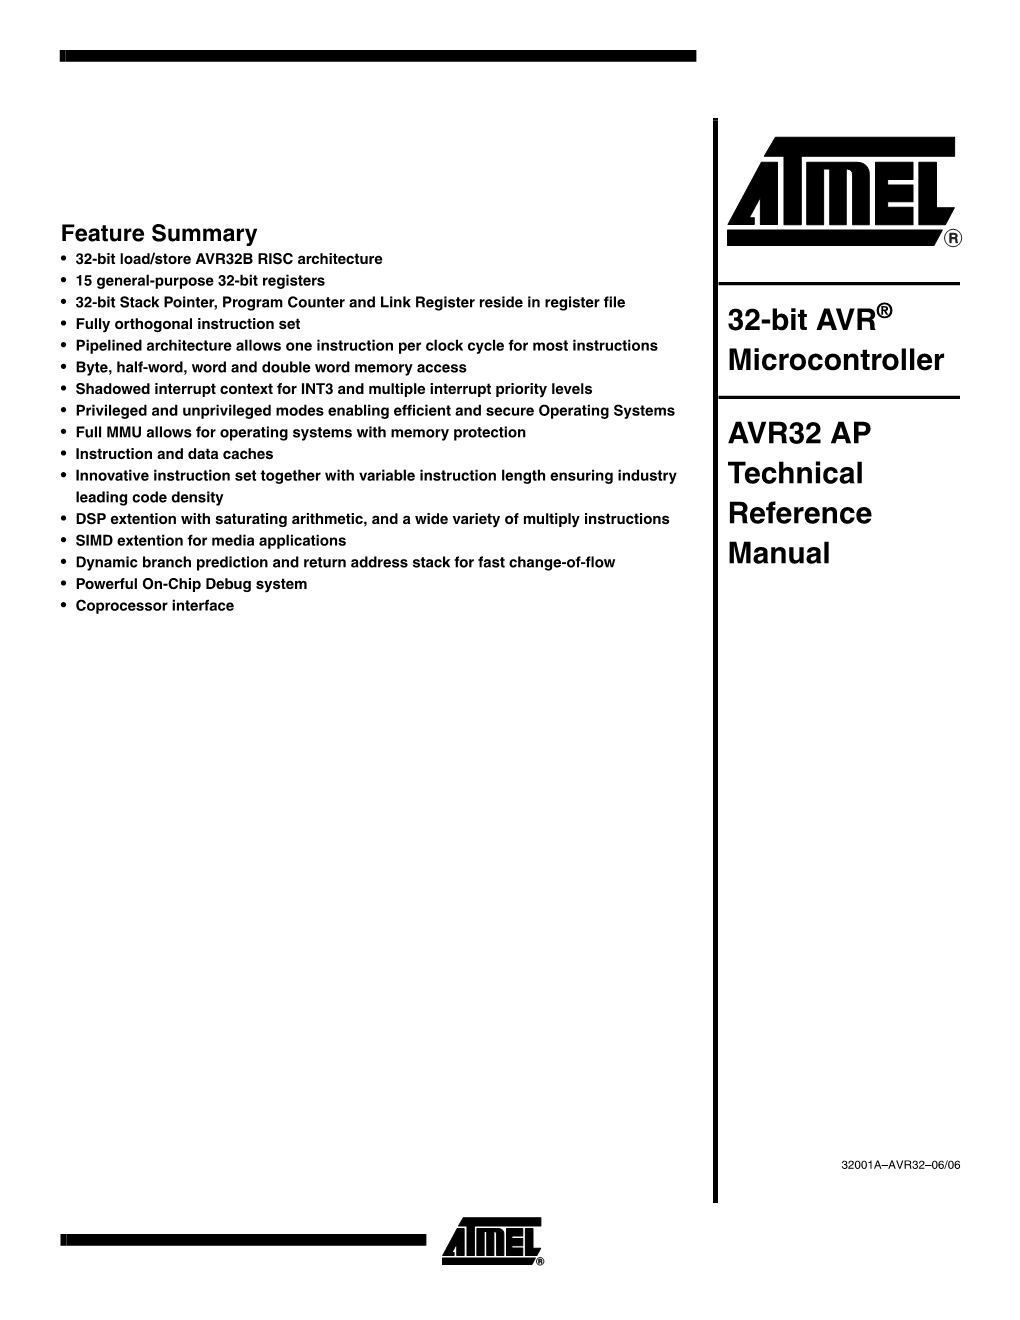 AVR(R) 32-Bit Technical Reference Manual